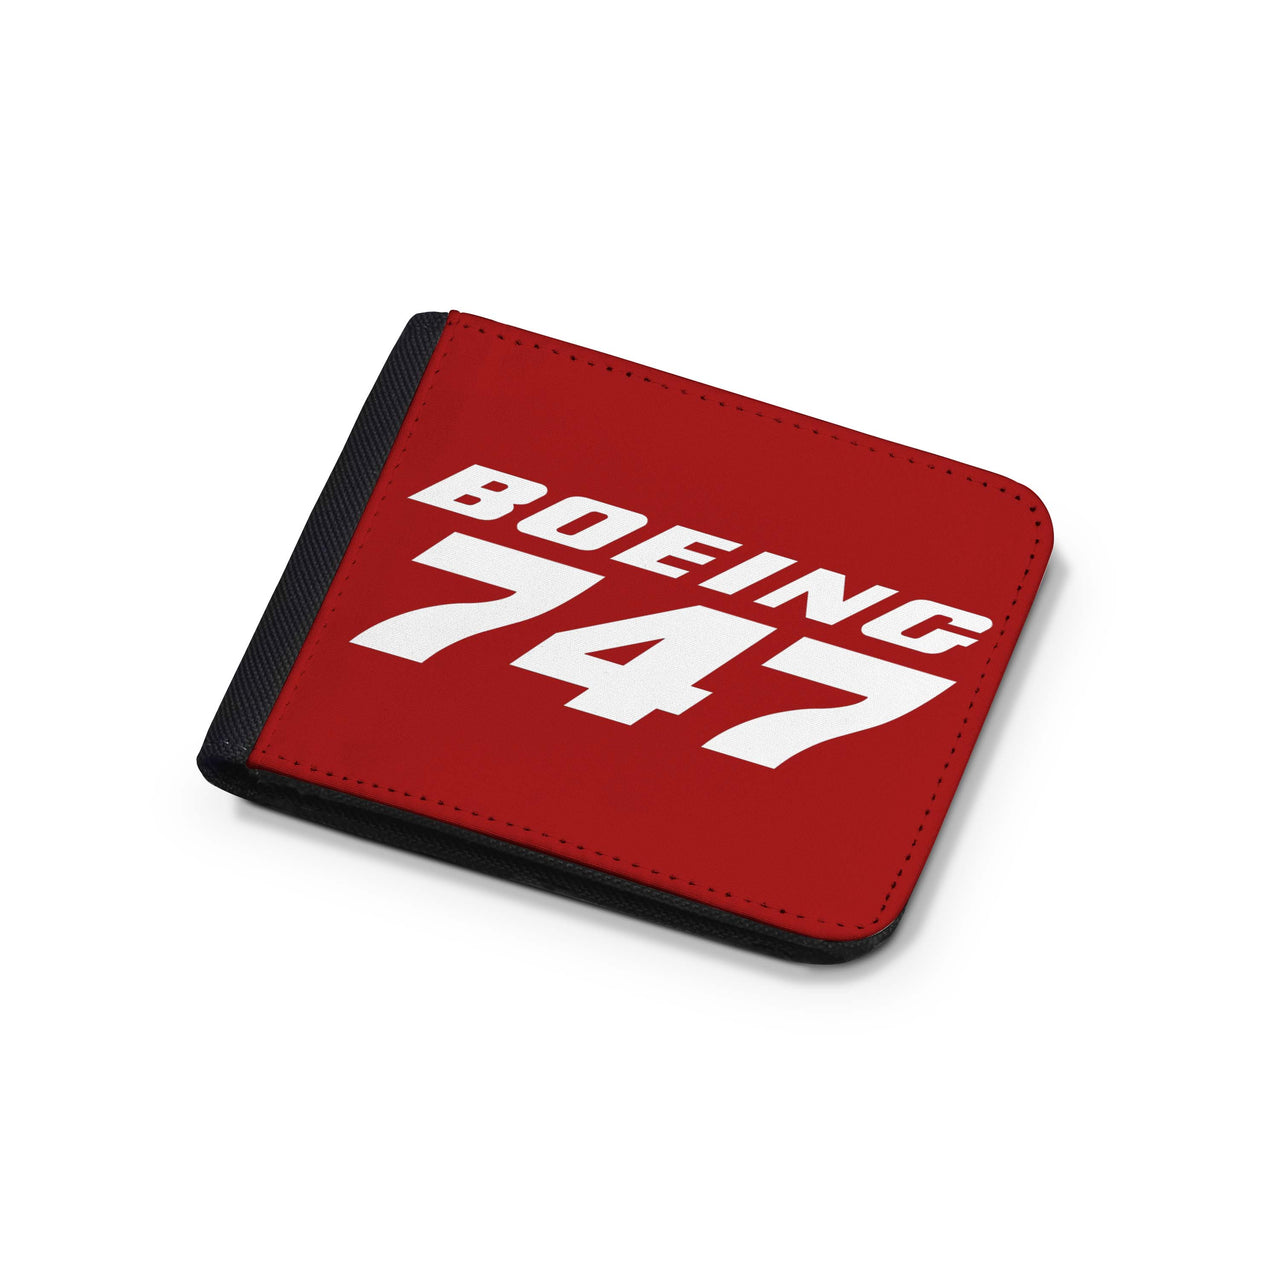 Boeing 747 & Text Designed Wallets